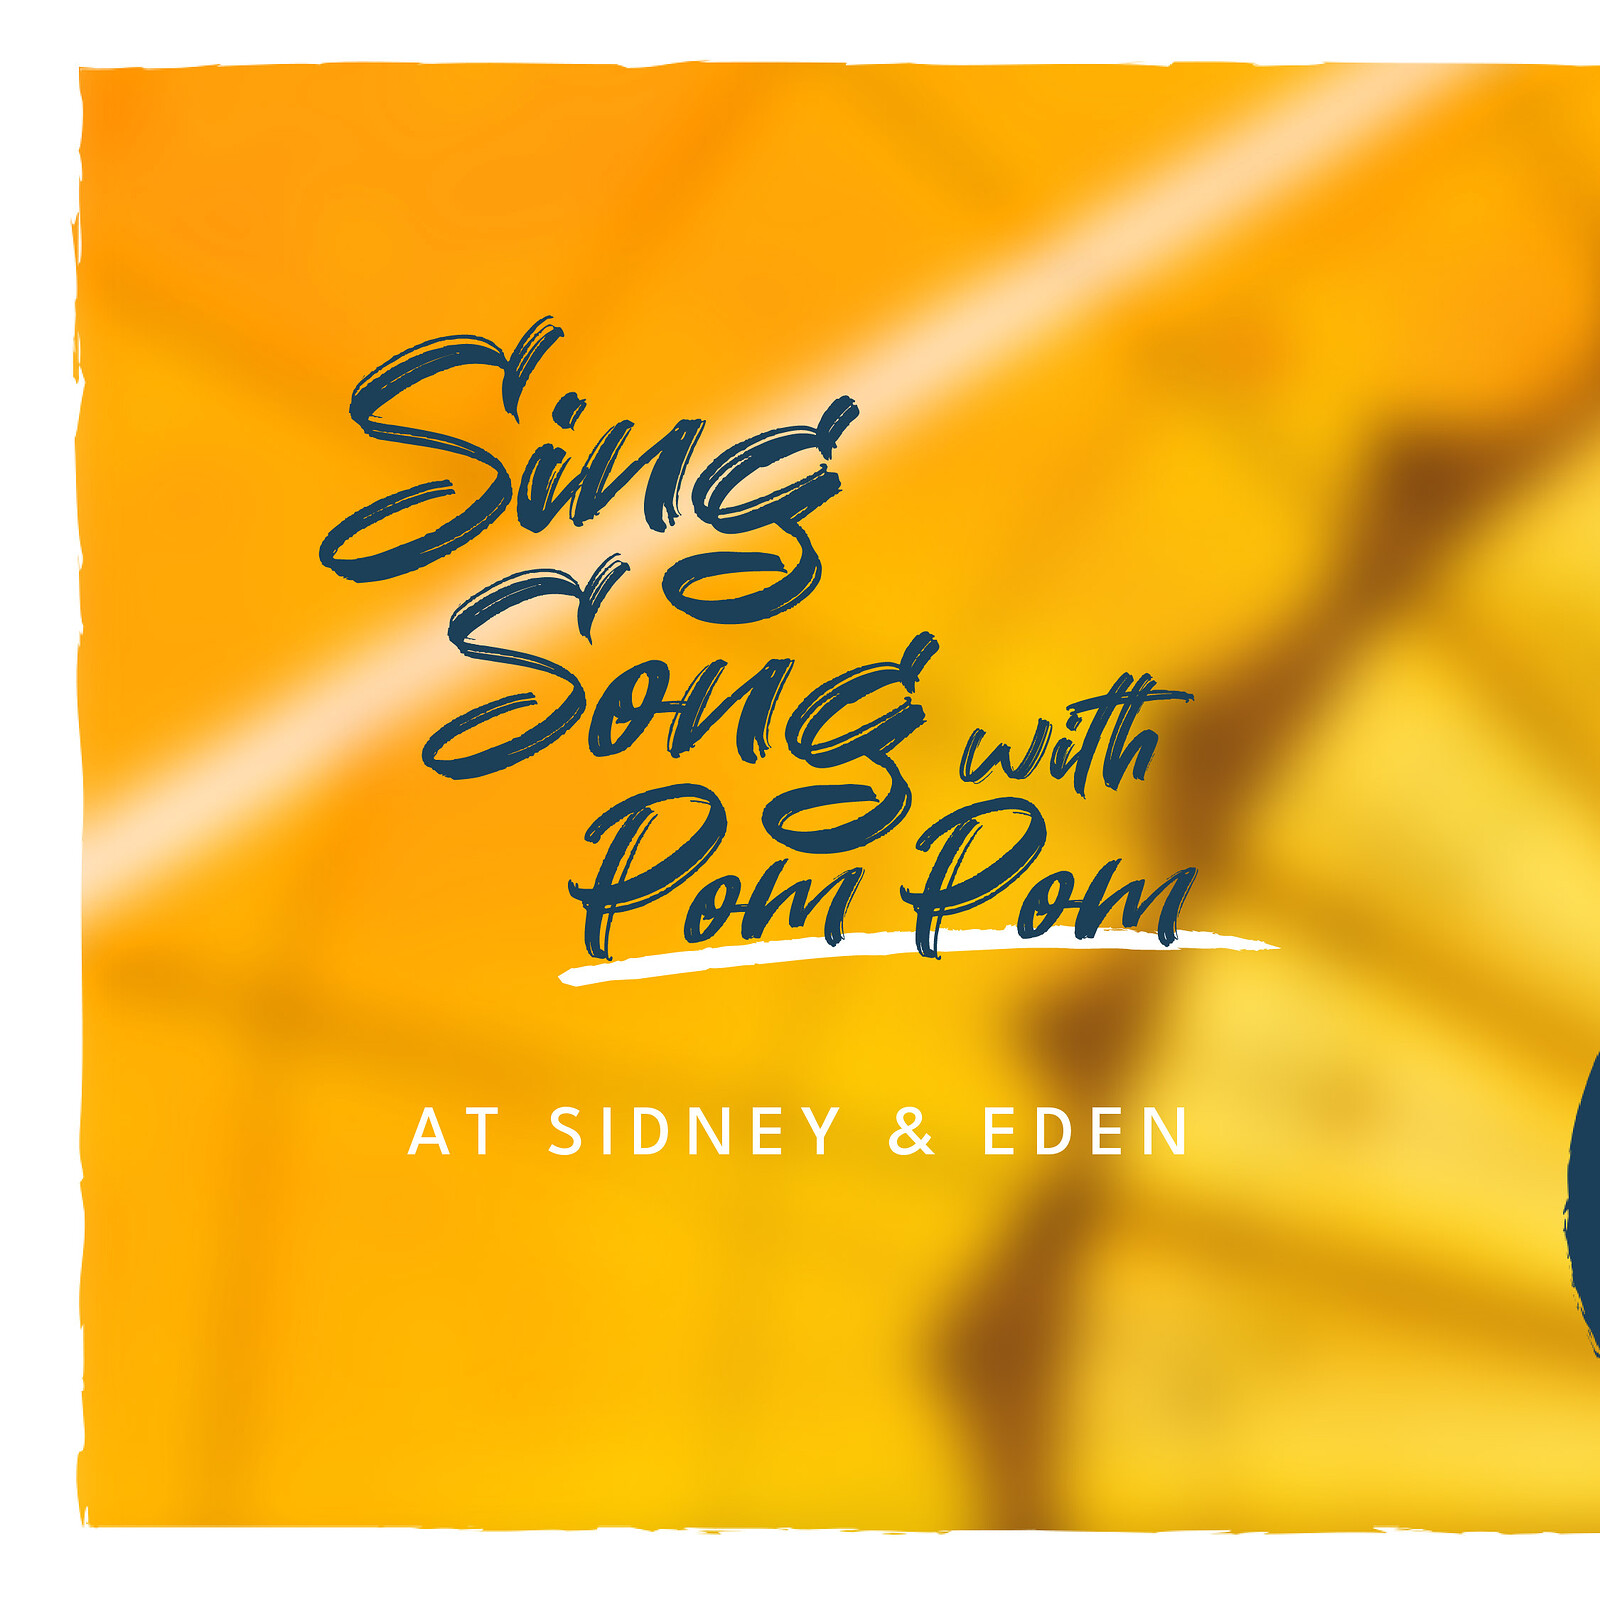 Sing Song with Pom Pom at Sidney & Eden